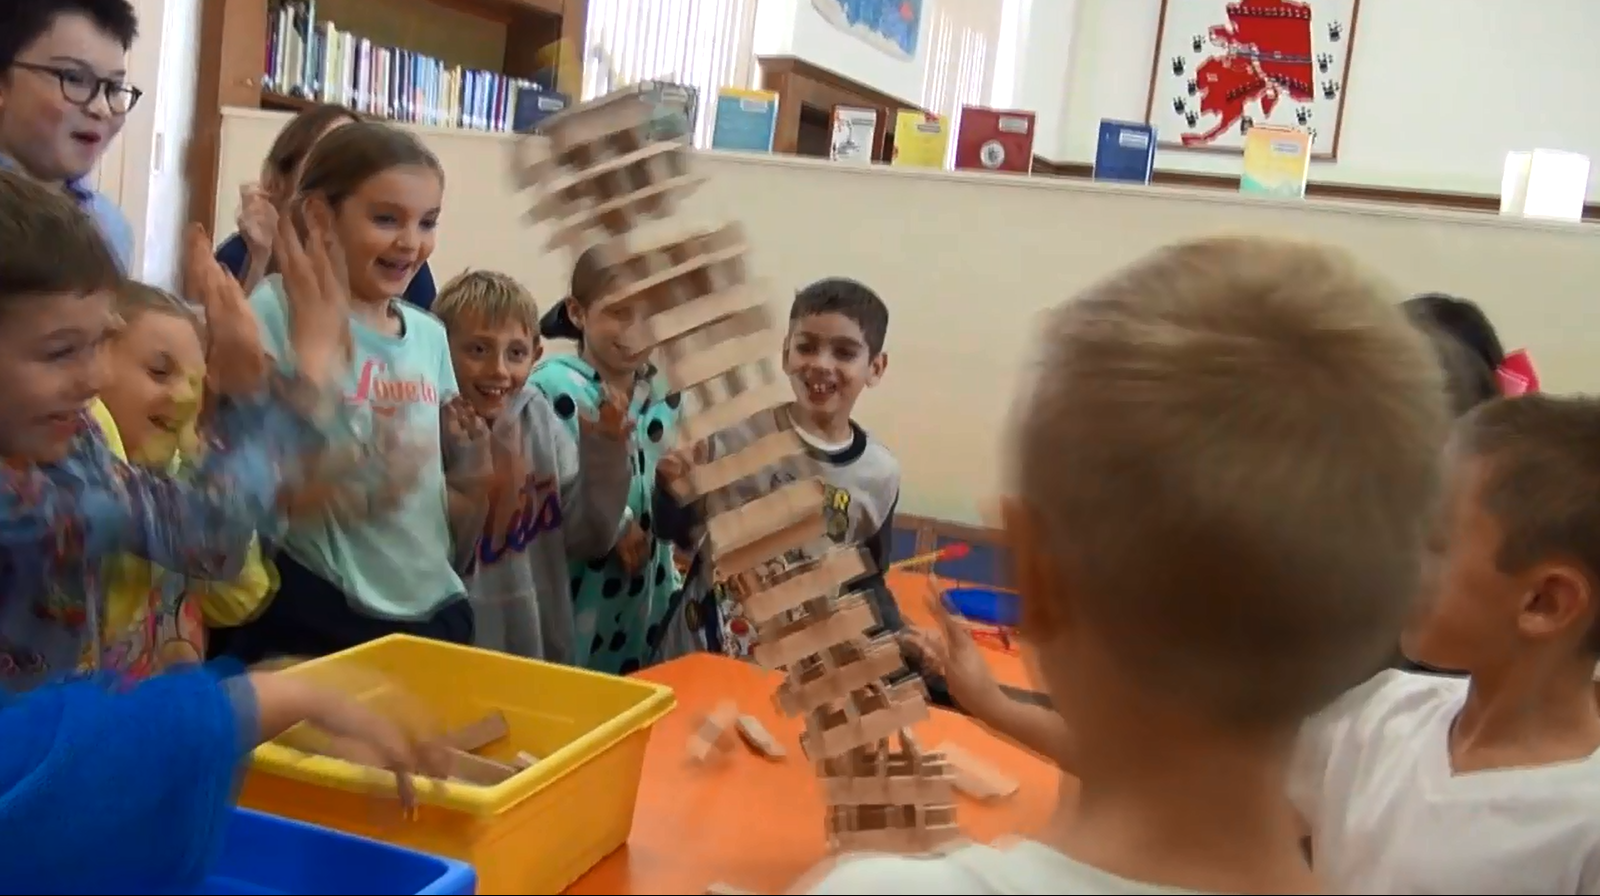 Students excited as a tower of blocks fall over.